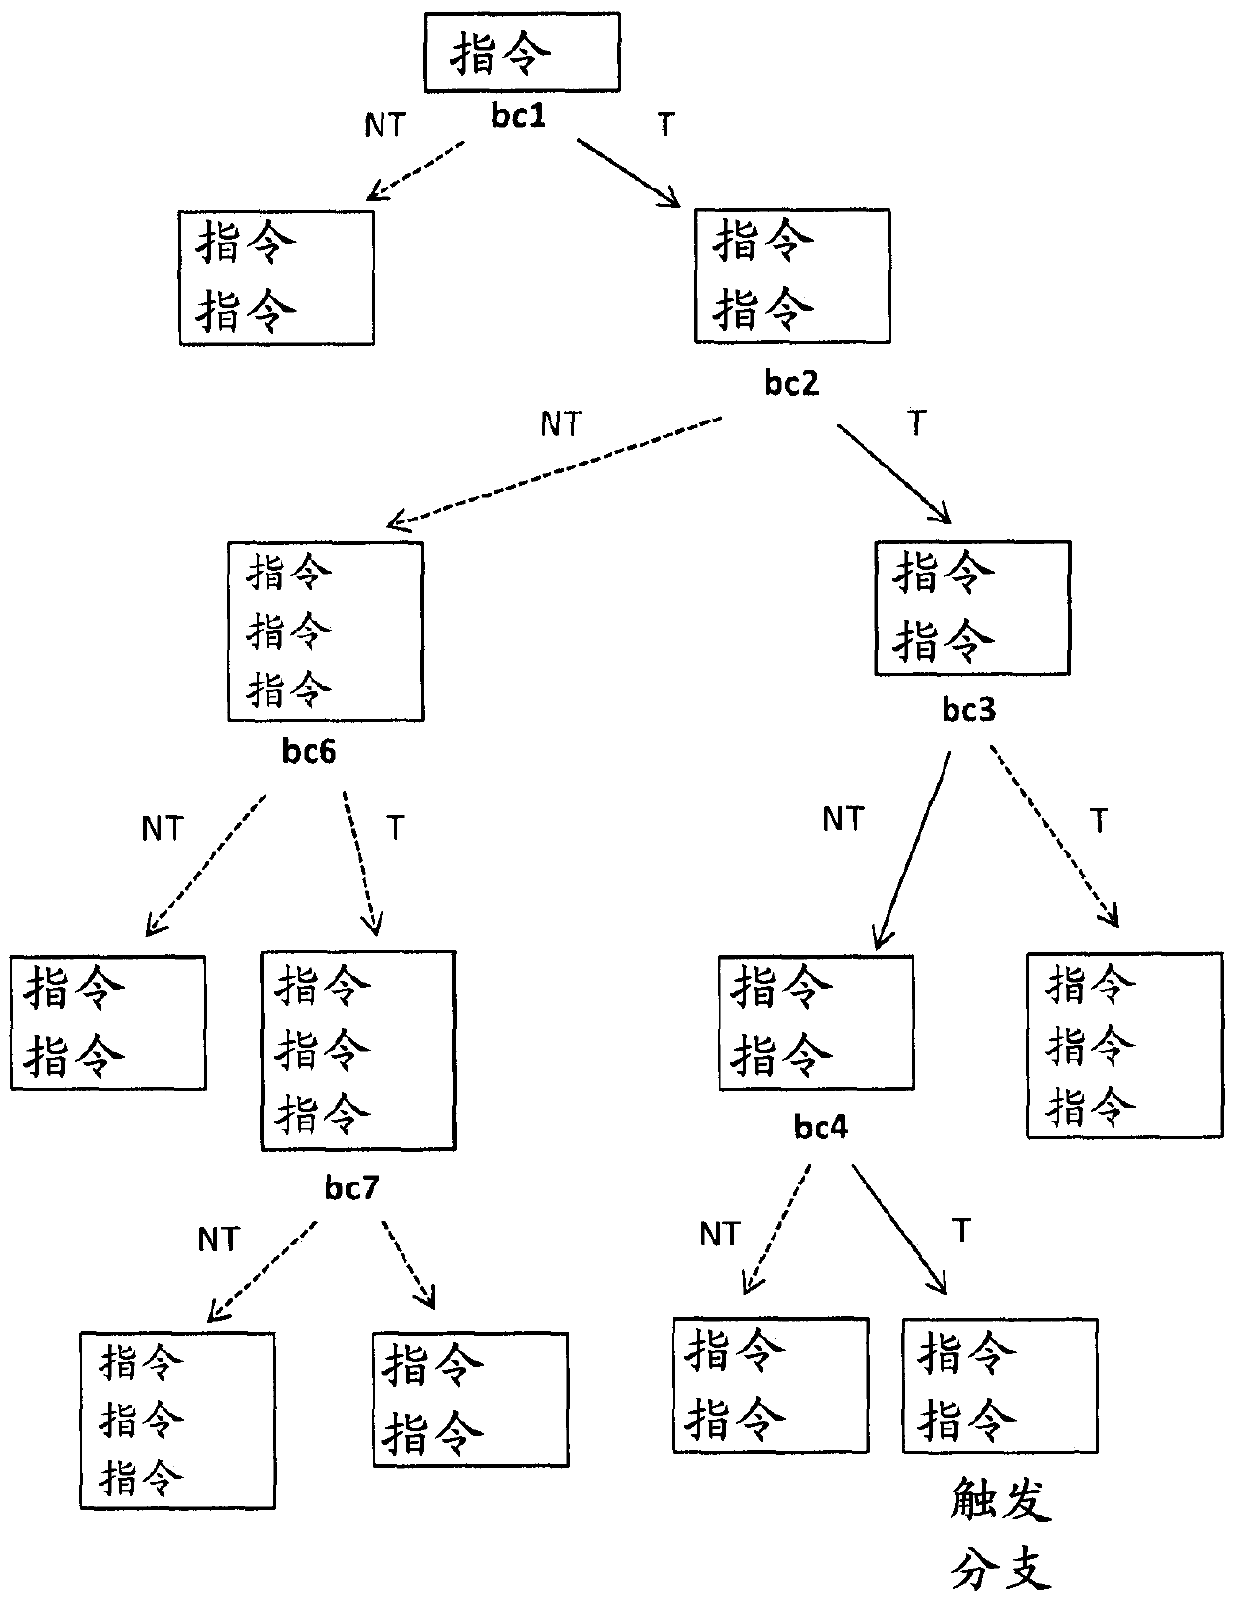 Method and system for hardware-based edge profiling